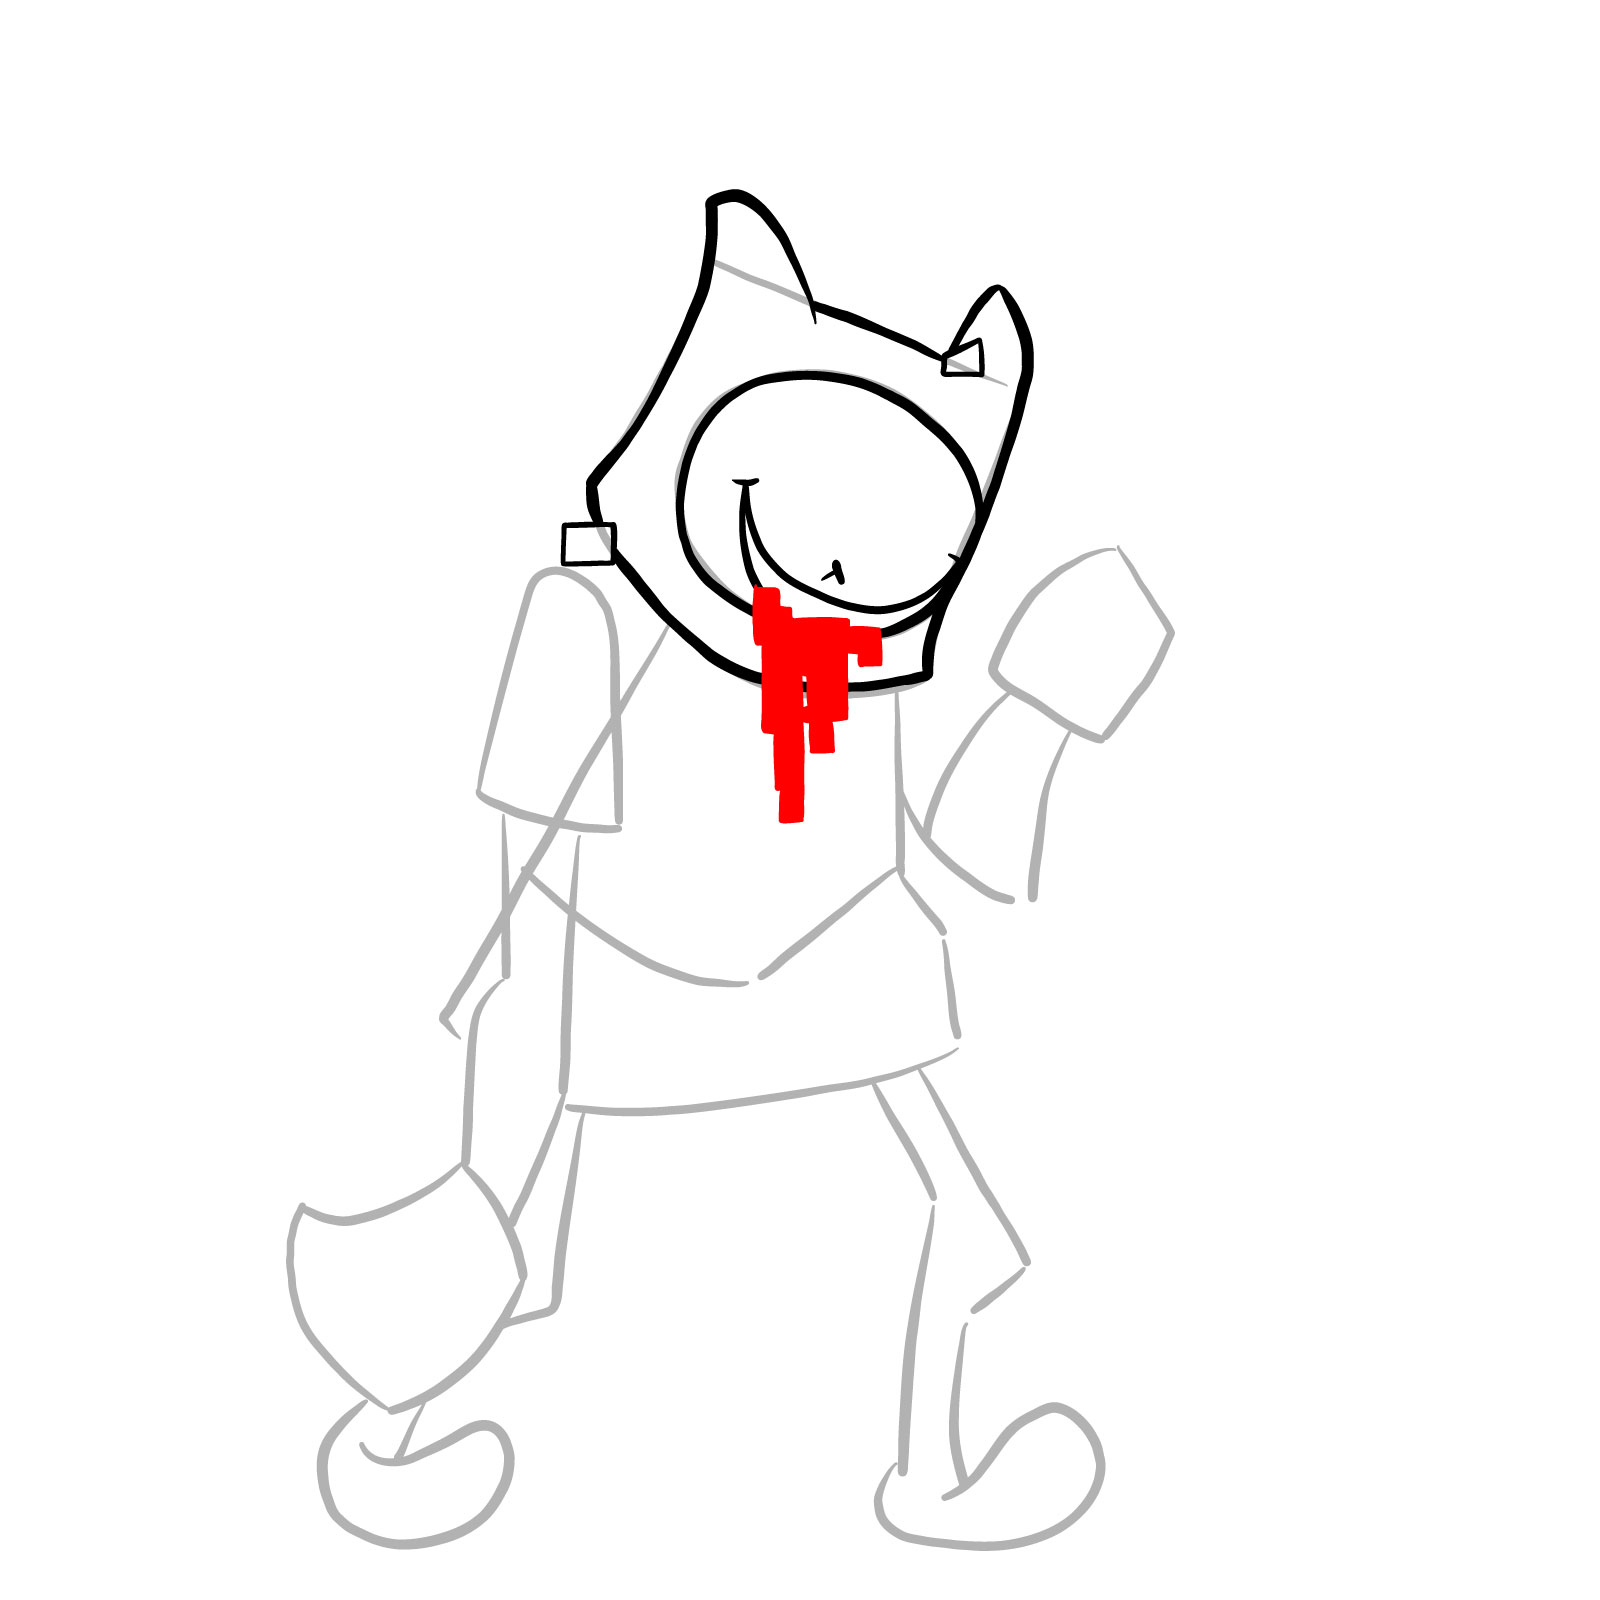 How to draw Finn - FNF: Pibby Corrupted - Sketchok easy drawing guides